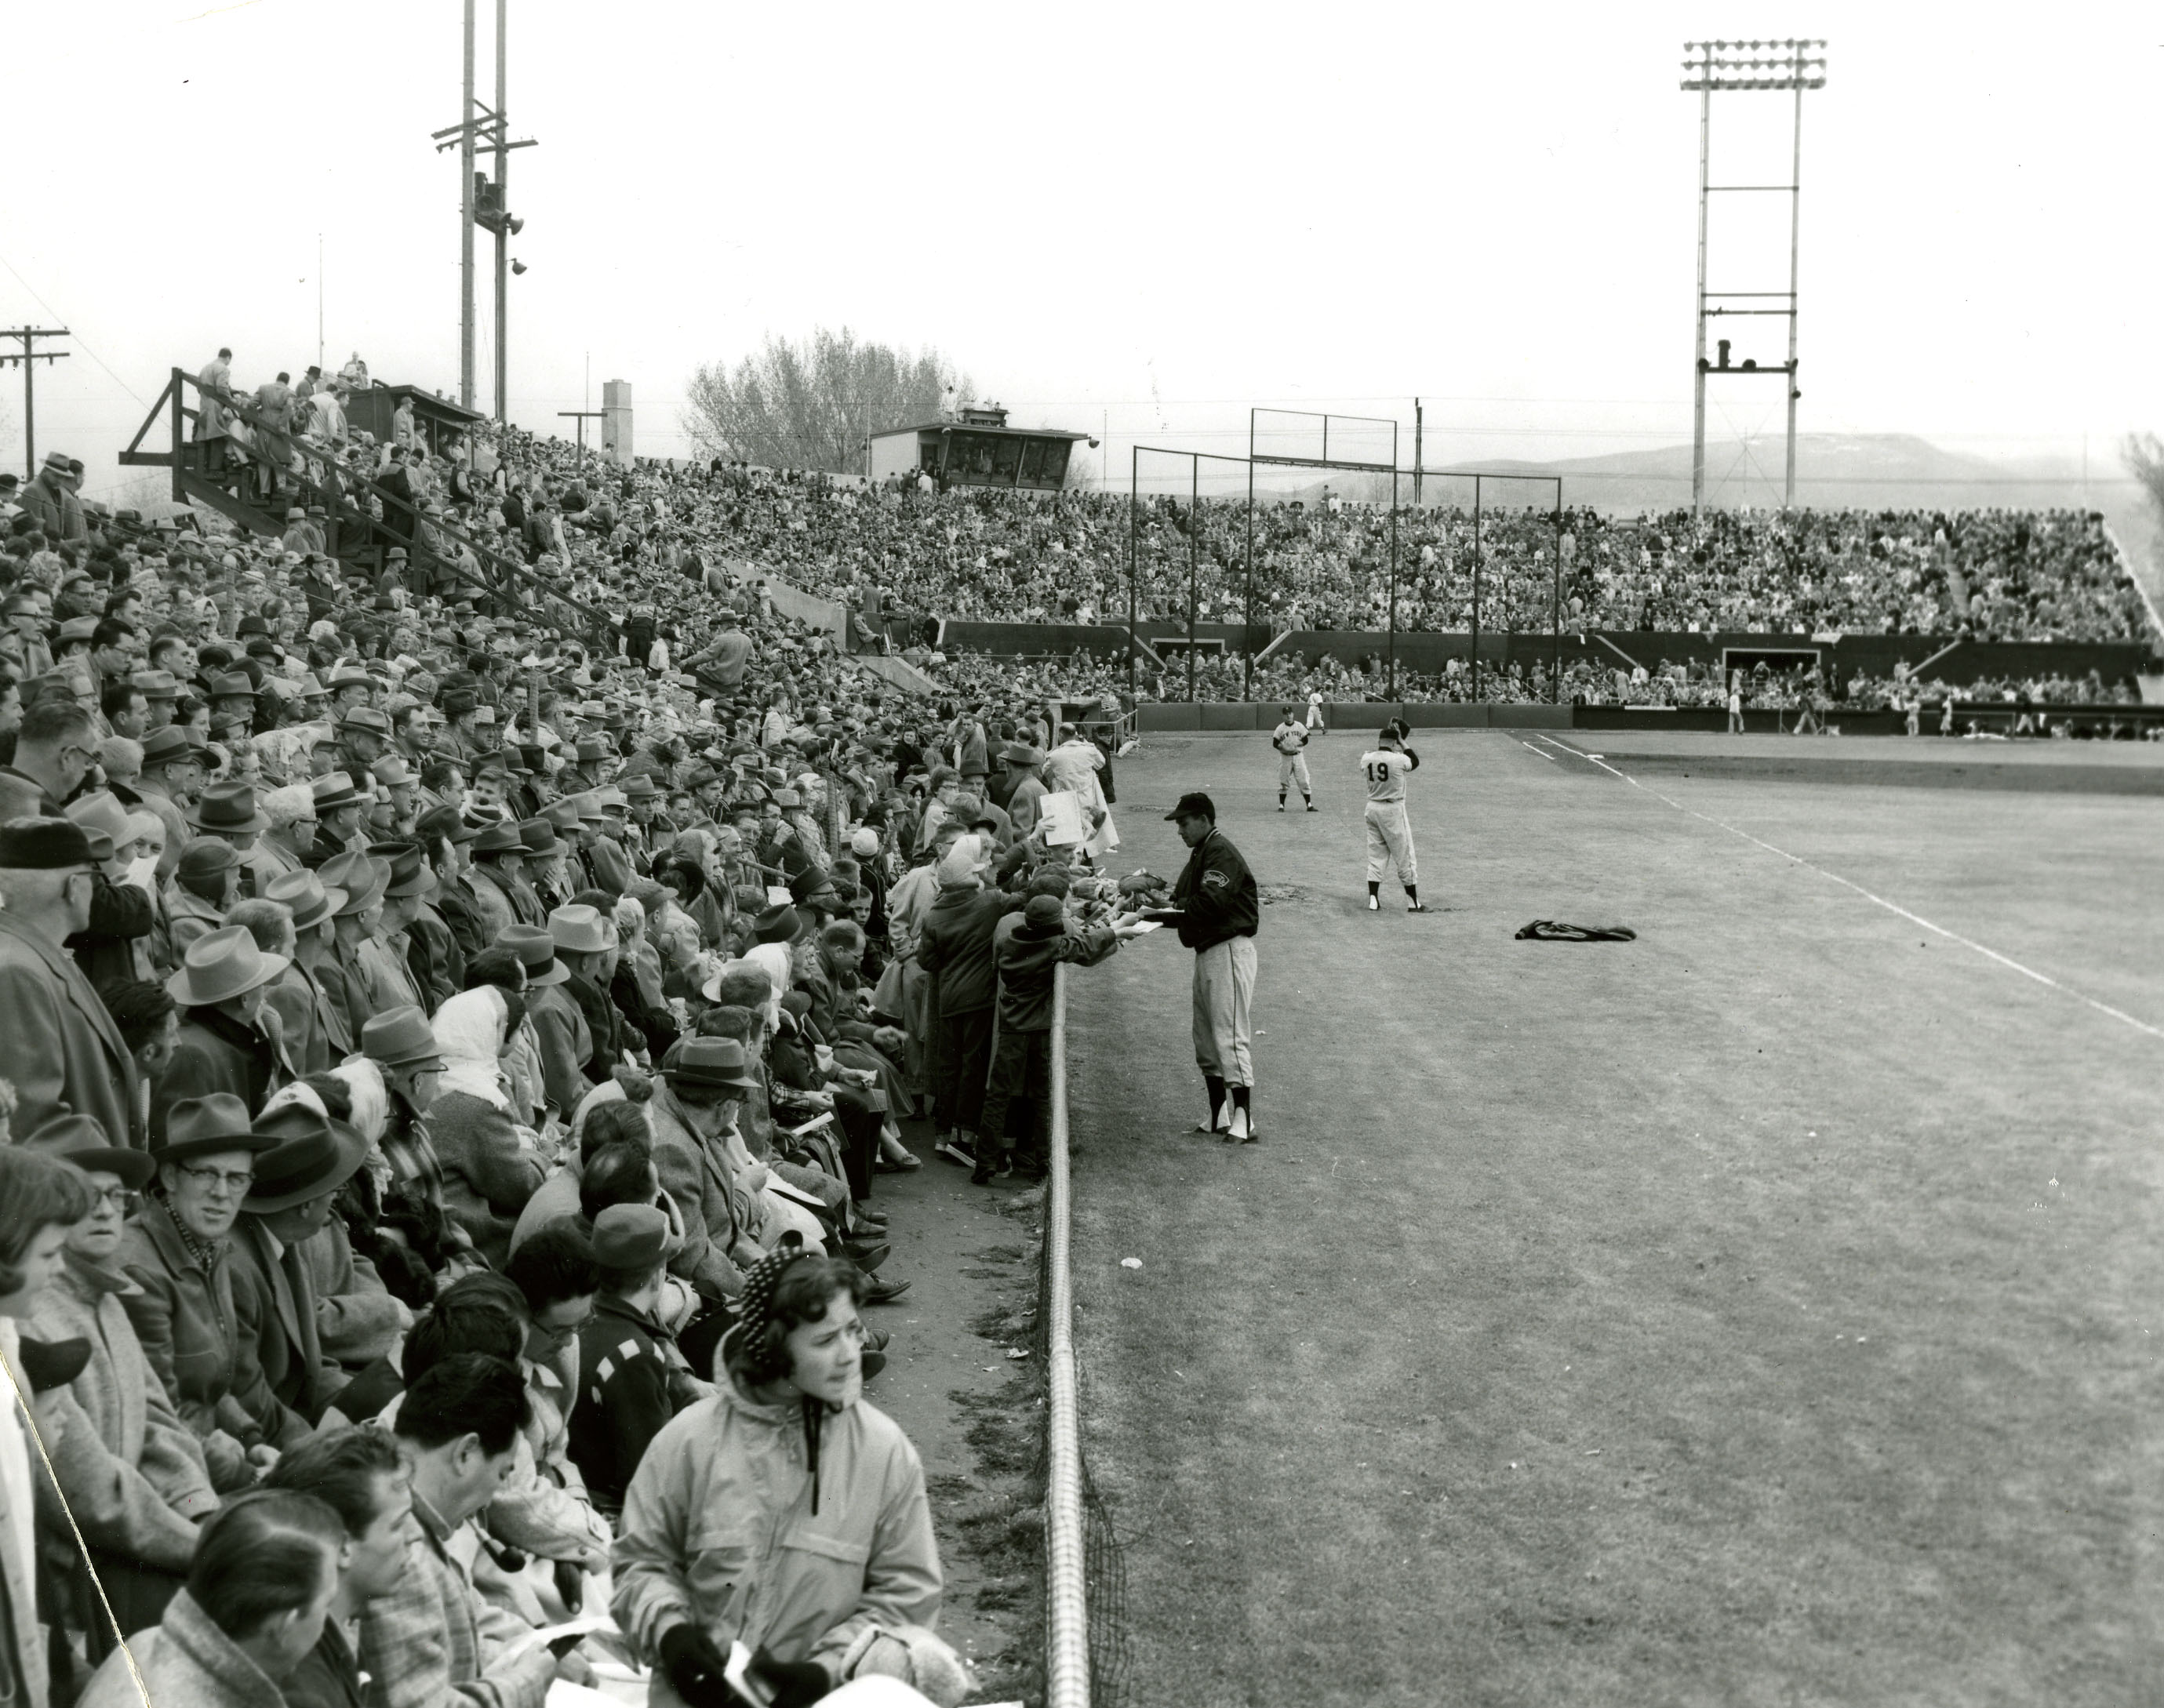 Salt Lake Bees on X: Smith's Ballpark has the largest crowd in